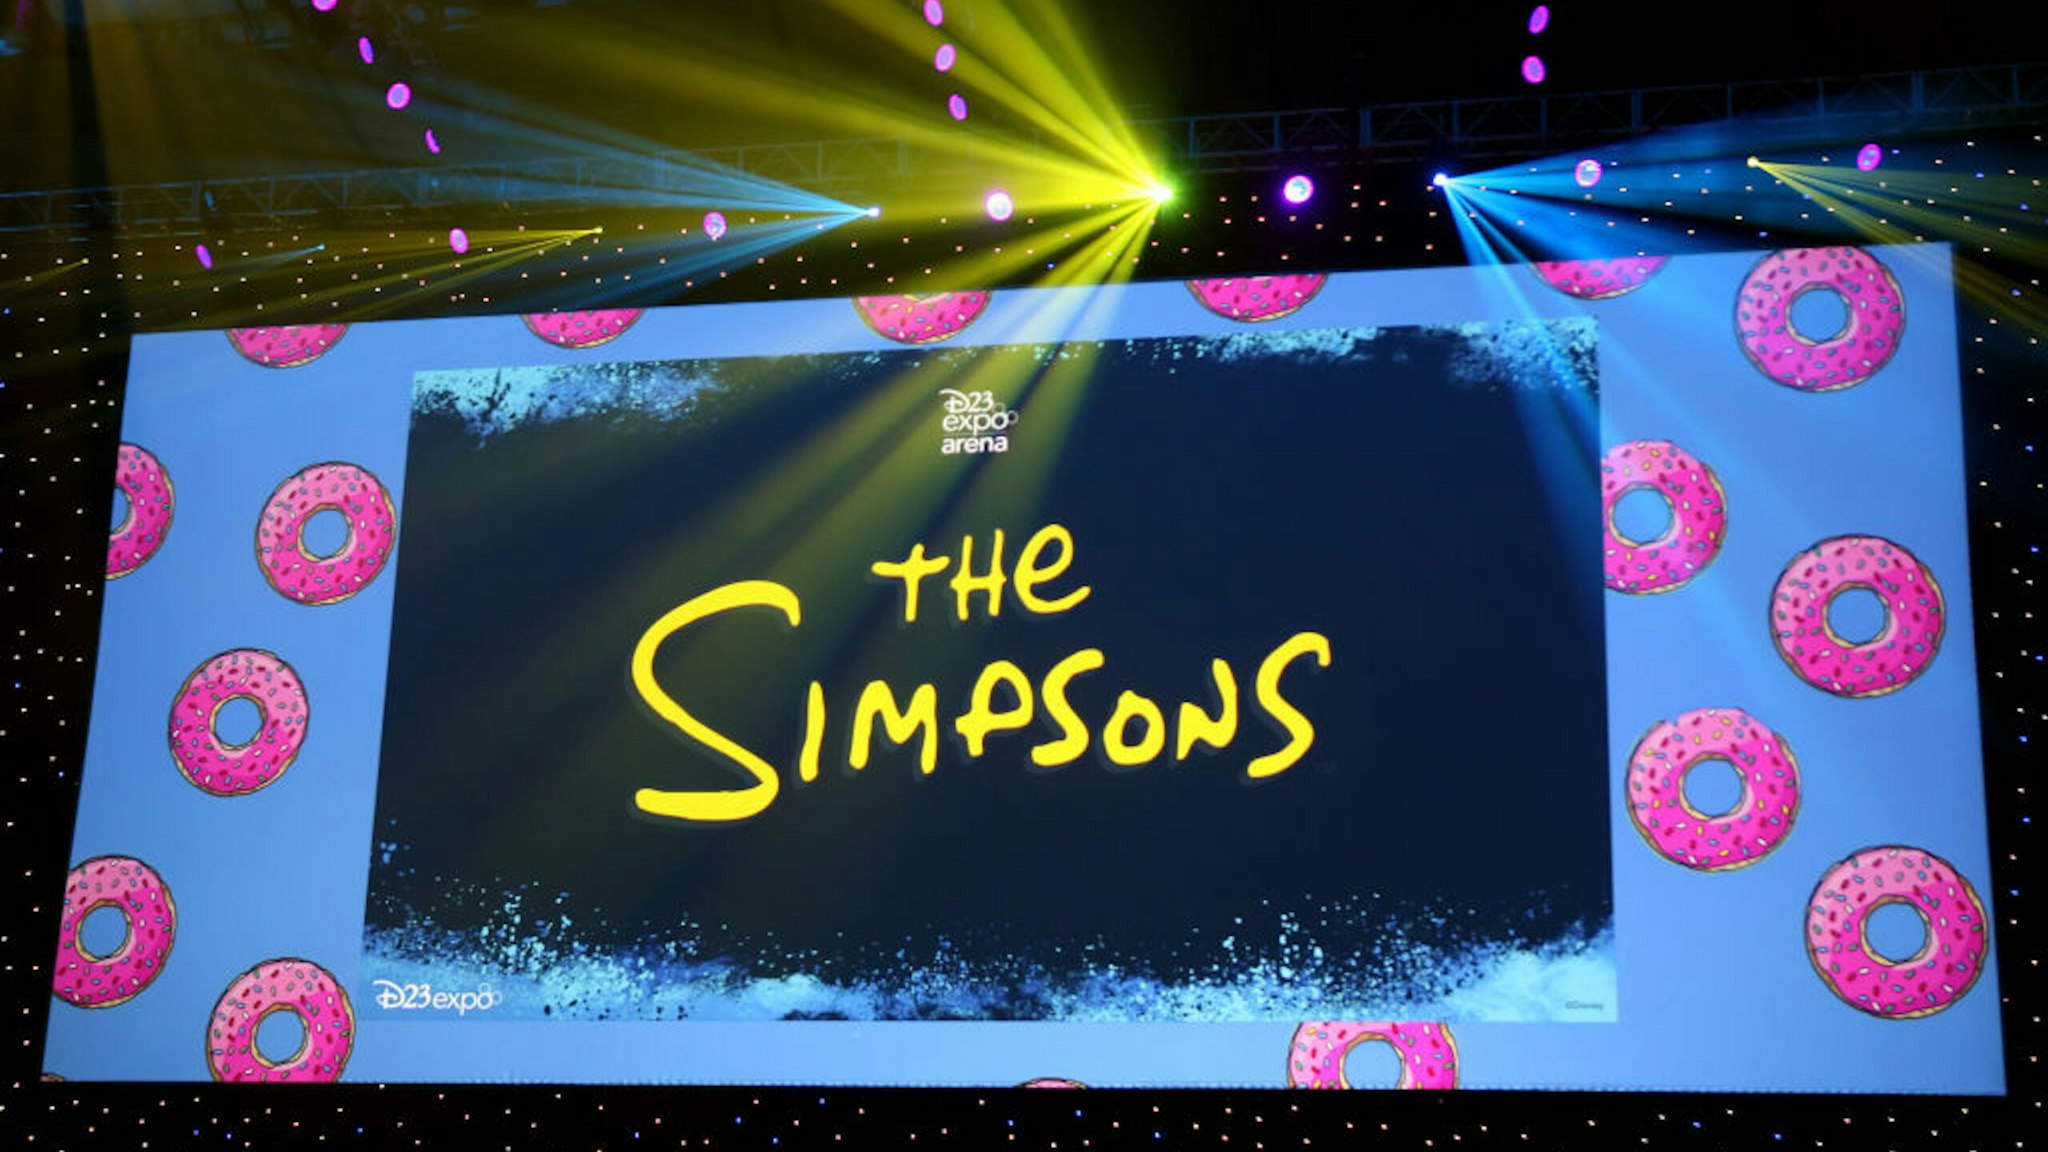 ANAHEIM, CALIFORNIA - AUGUST 24: A view of the screen at The Simpsons! panel during the 2019 D23 Expo at Anaheim Convention Center on August 24, 2019 in Anaheim, California.